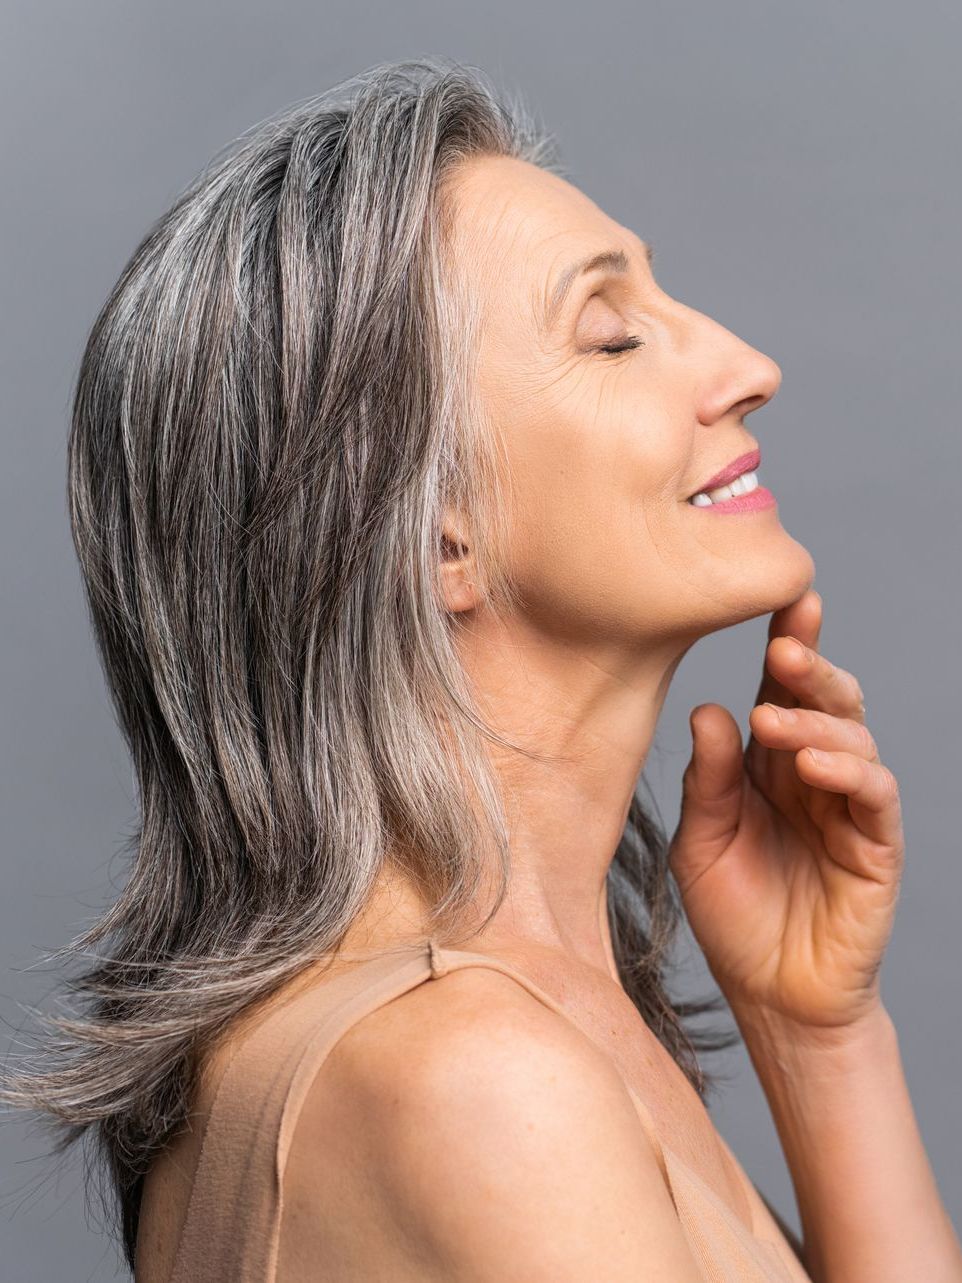 a woman with gray hair is smiling with her eyes closed